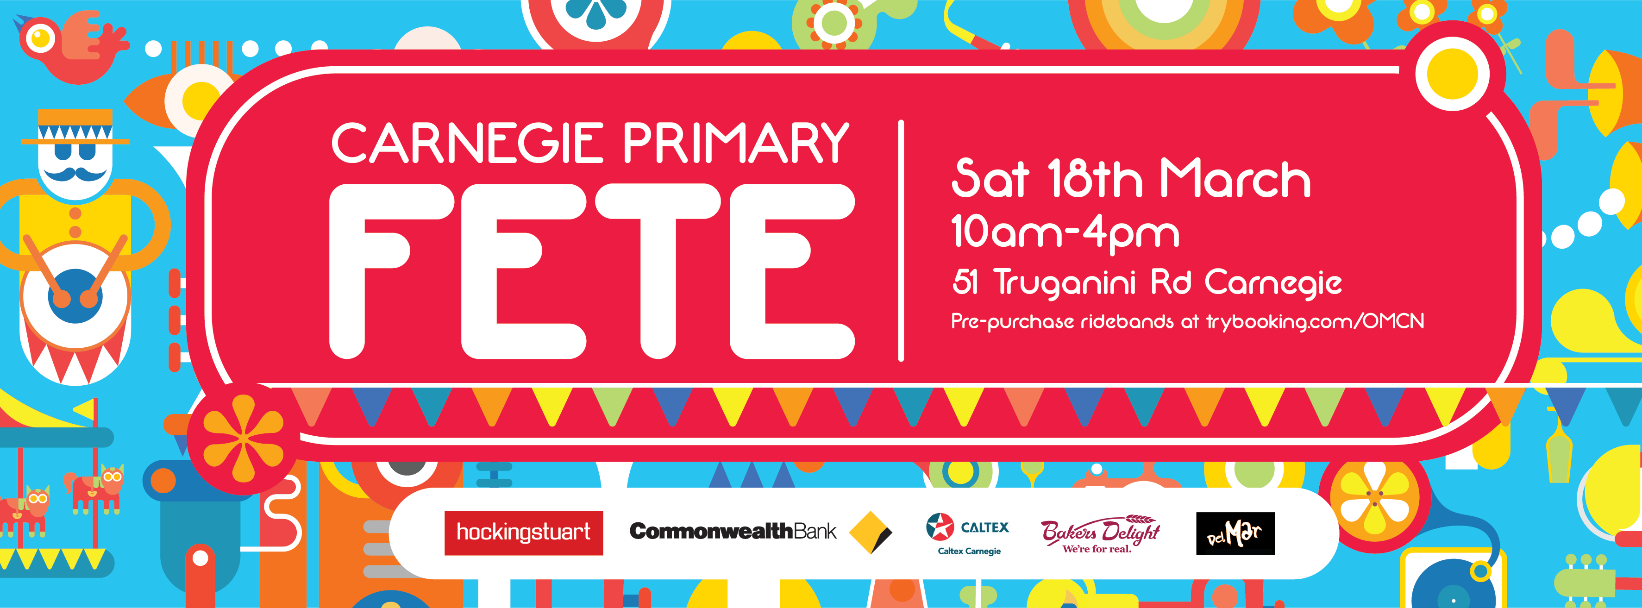 Come Along To Whatu0027S Sure To Be The Best Primary School Fete In Melbourne! - School Fete, Transparent background PNG HD thumbnail